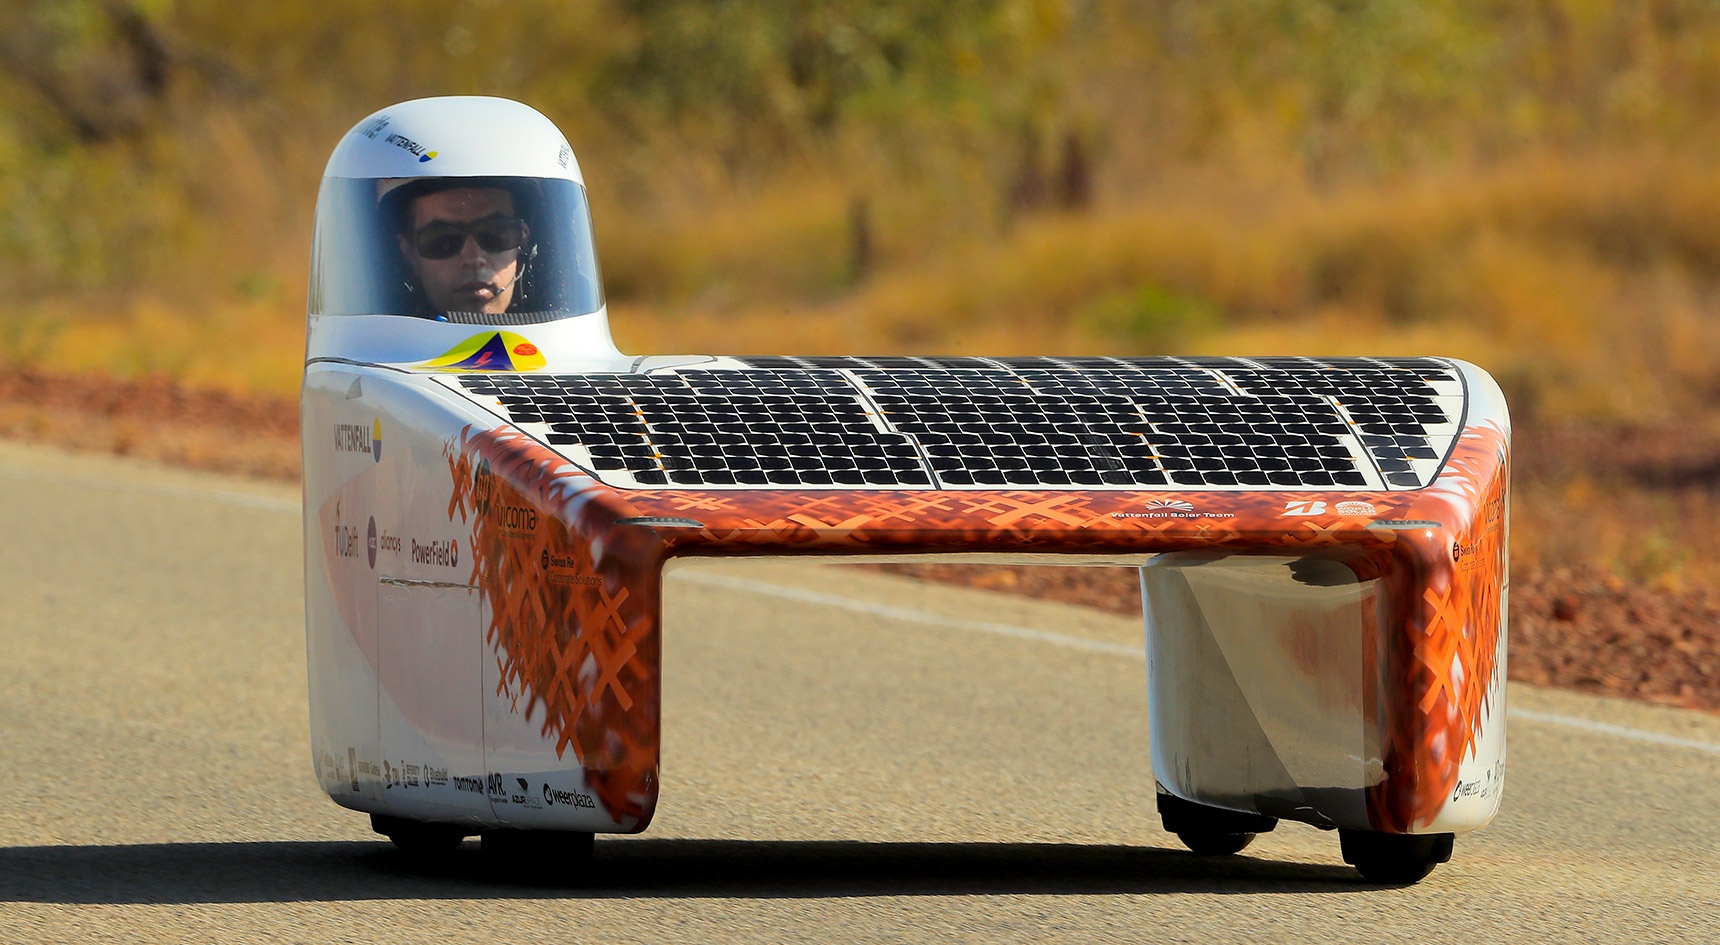 Futuristic looking car covered in solar panels.